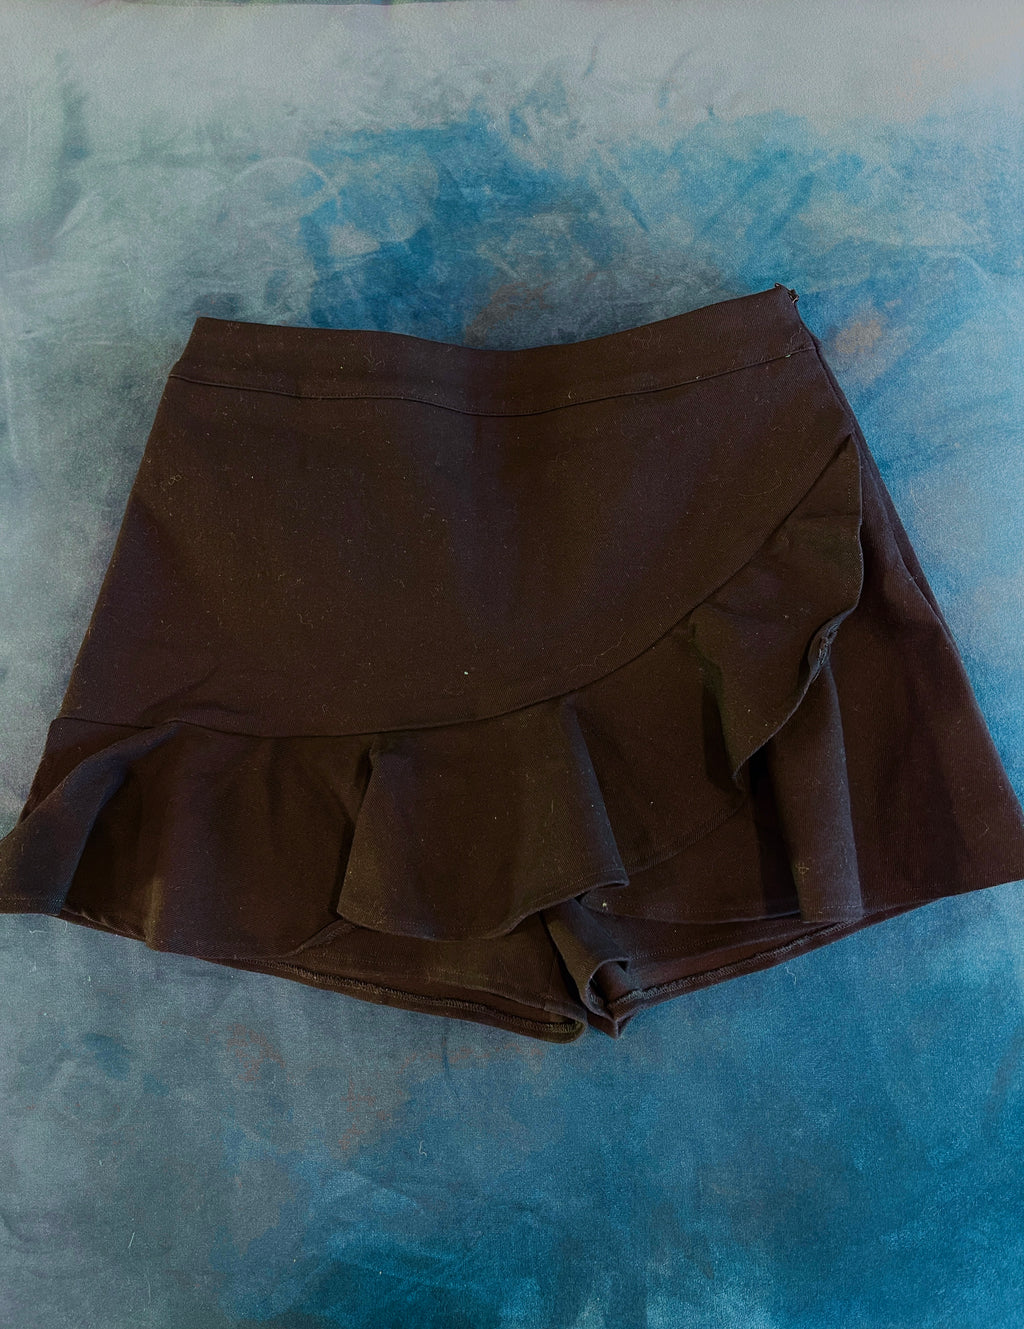 Black skort with front ruffled